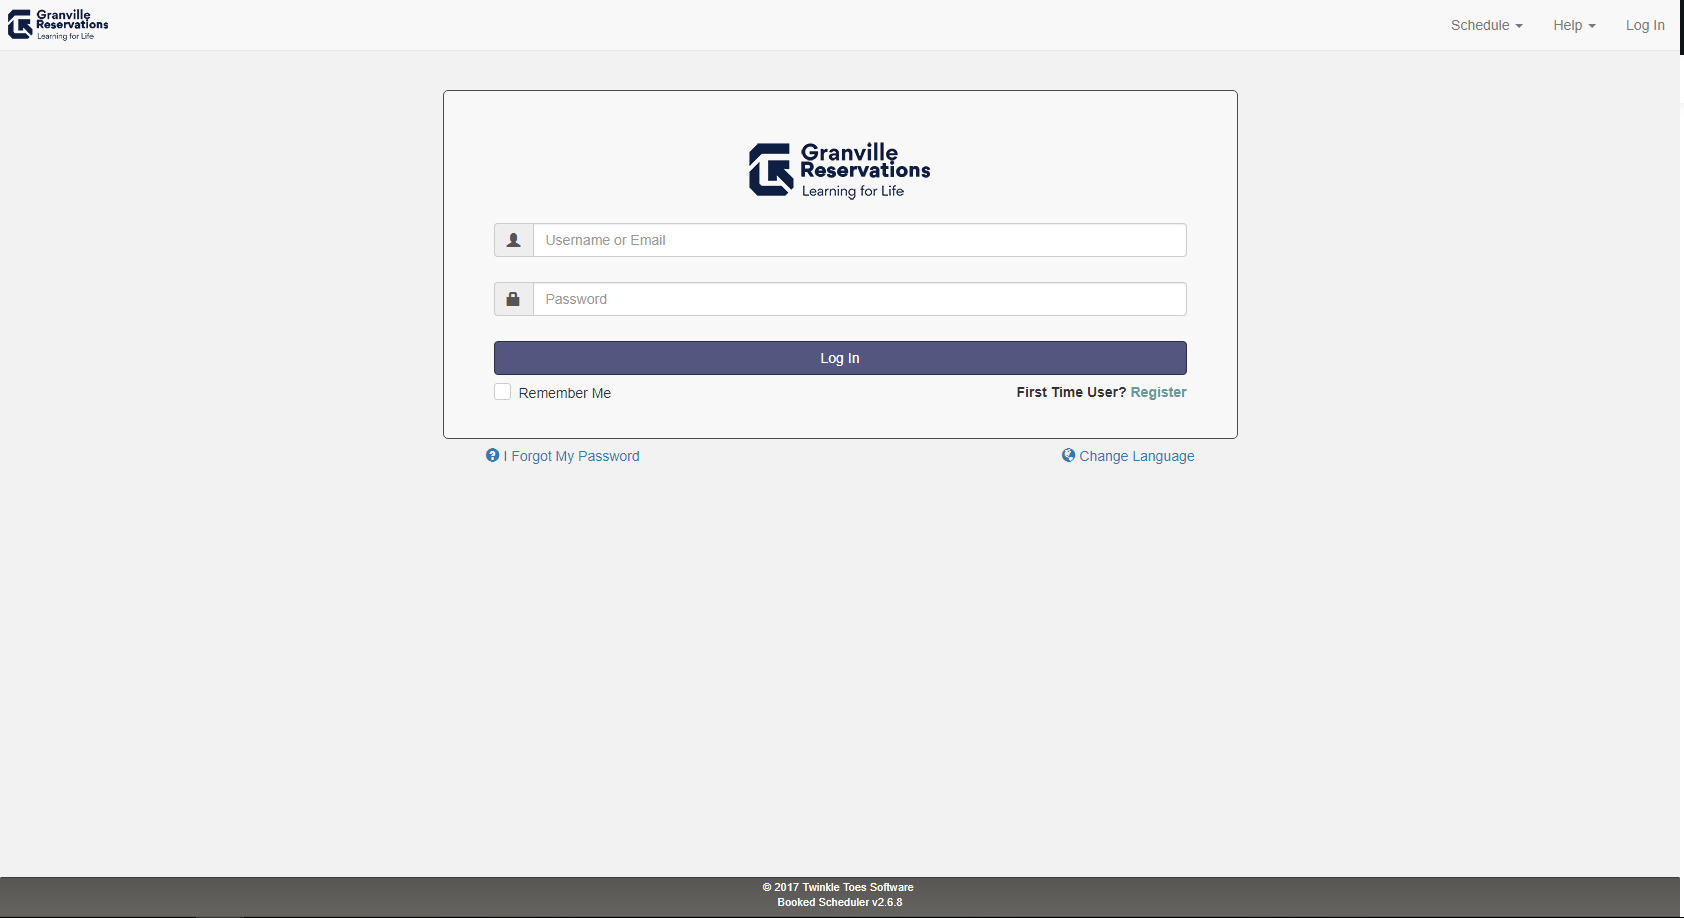 The login screen for Granville Reservations